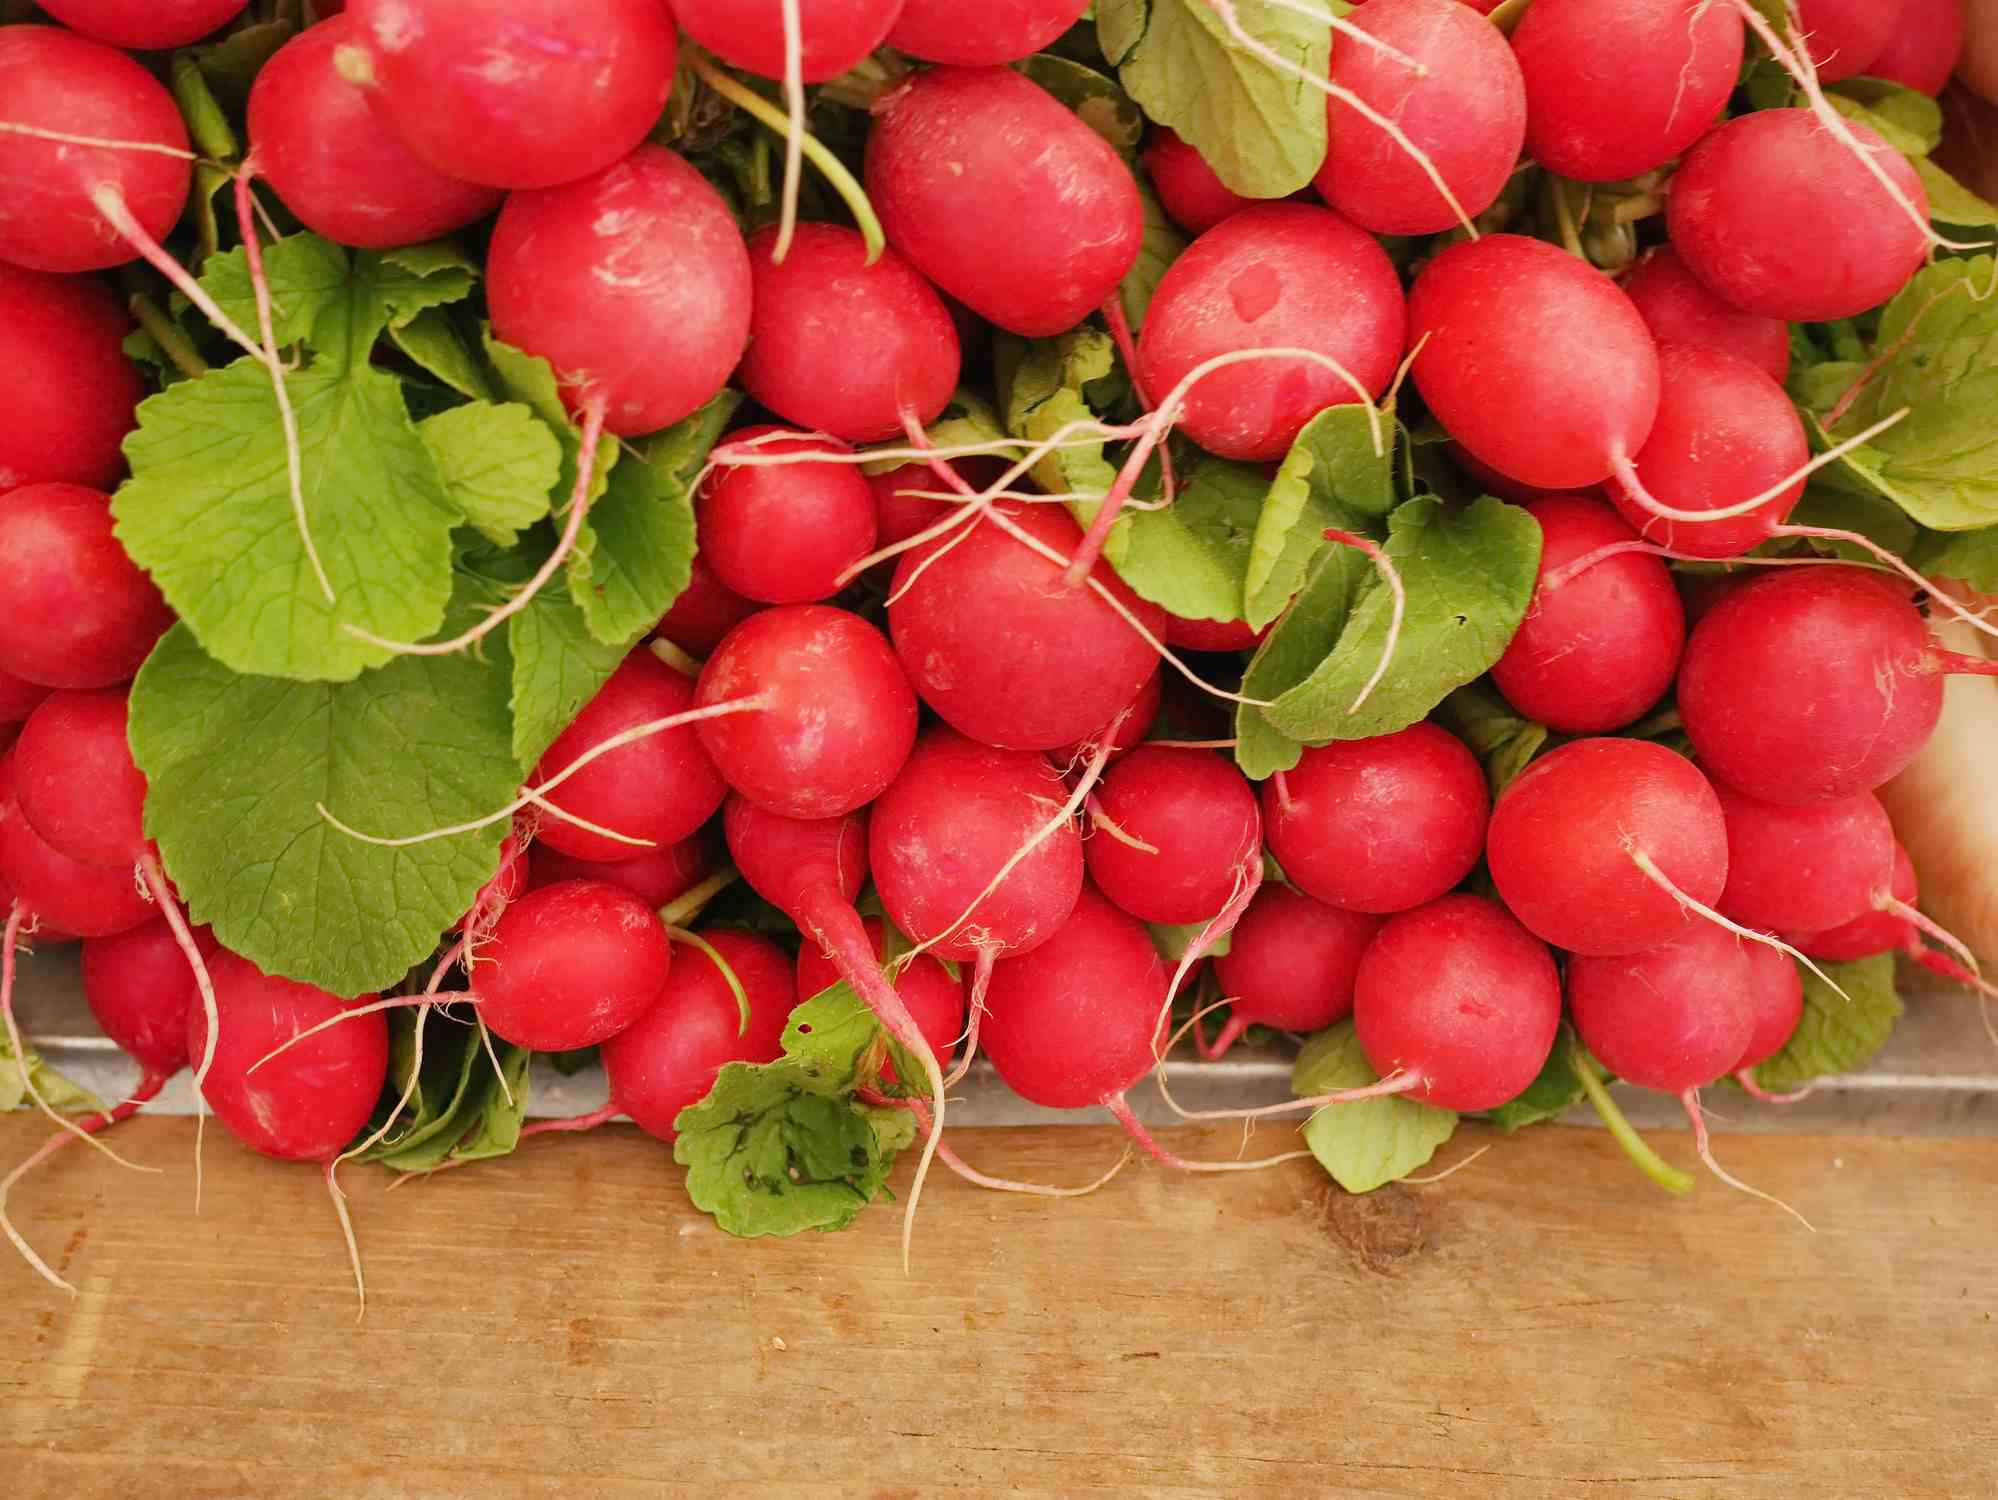 Radishes - Rettich - Kinds and Uses